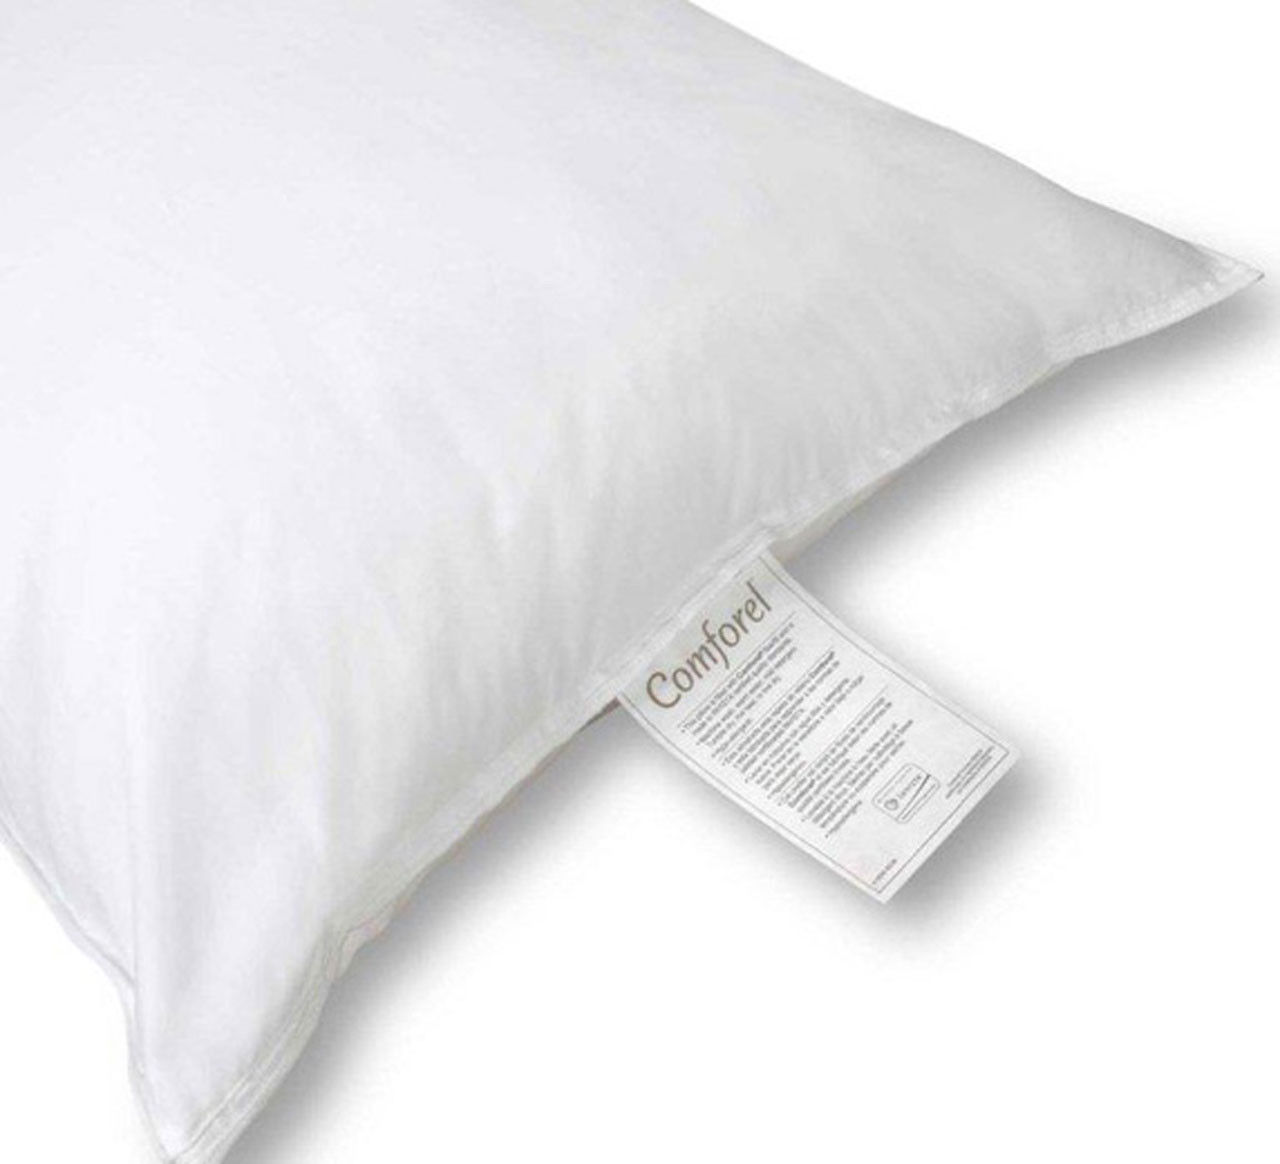 Where are the Comforel pillows manufactured?